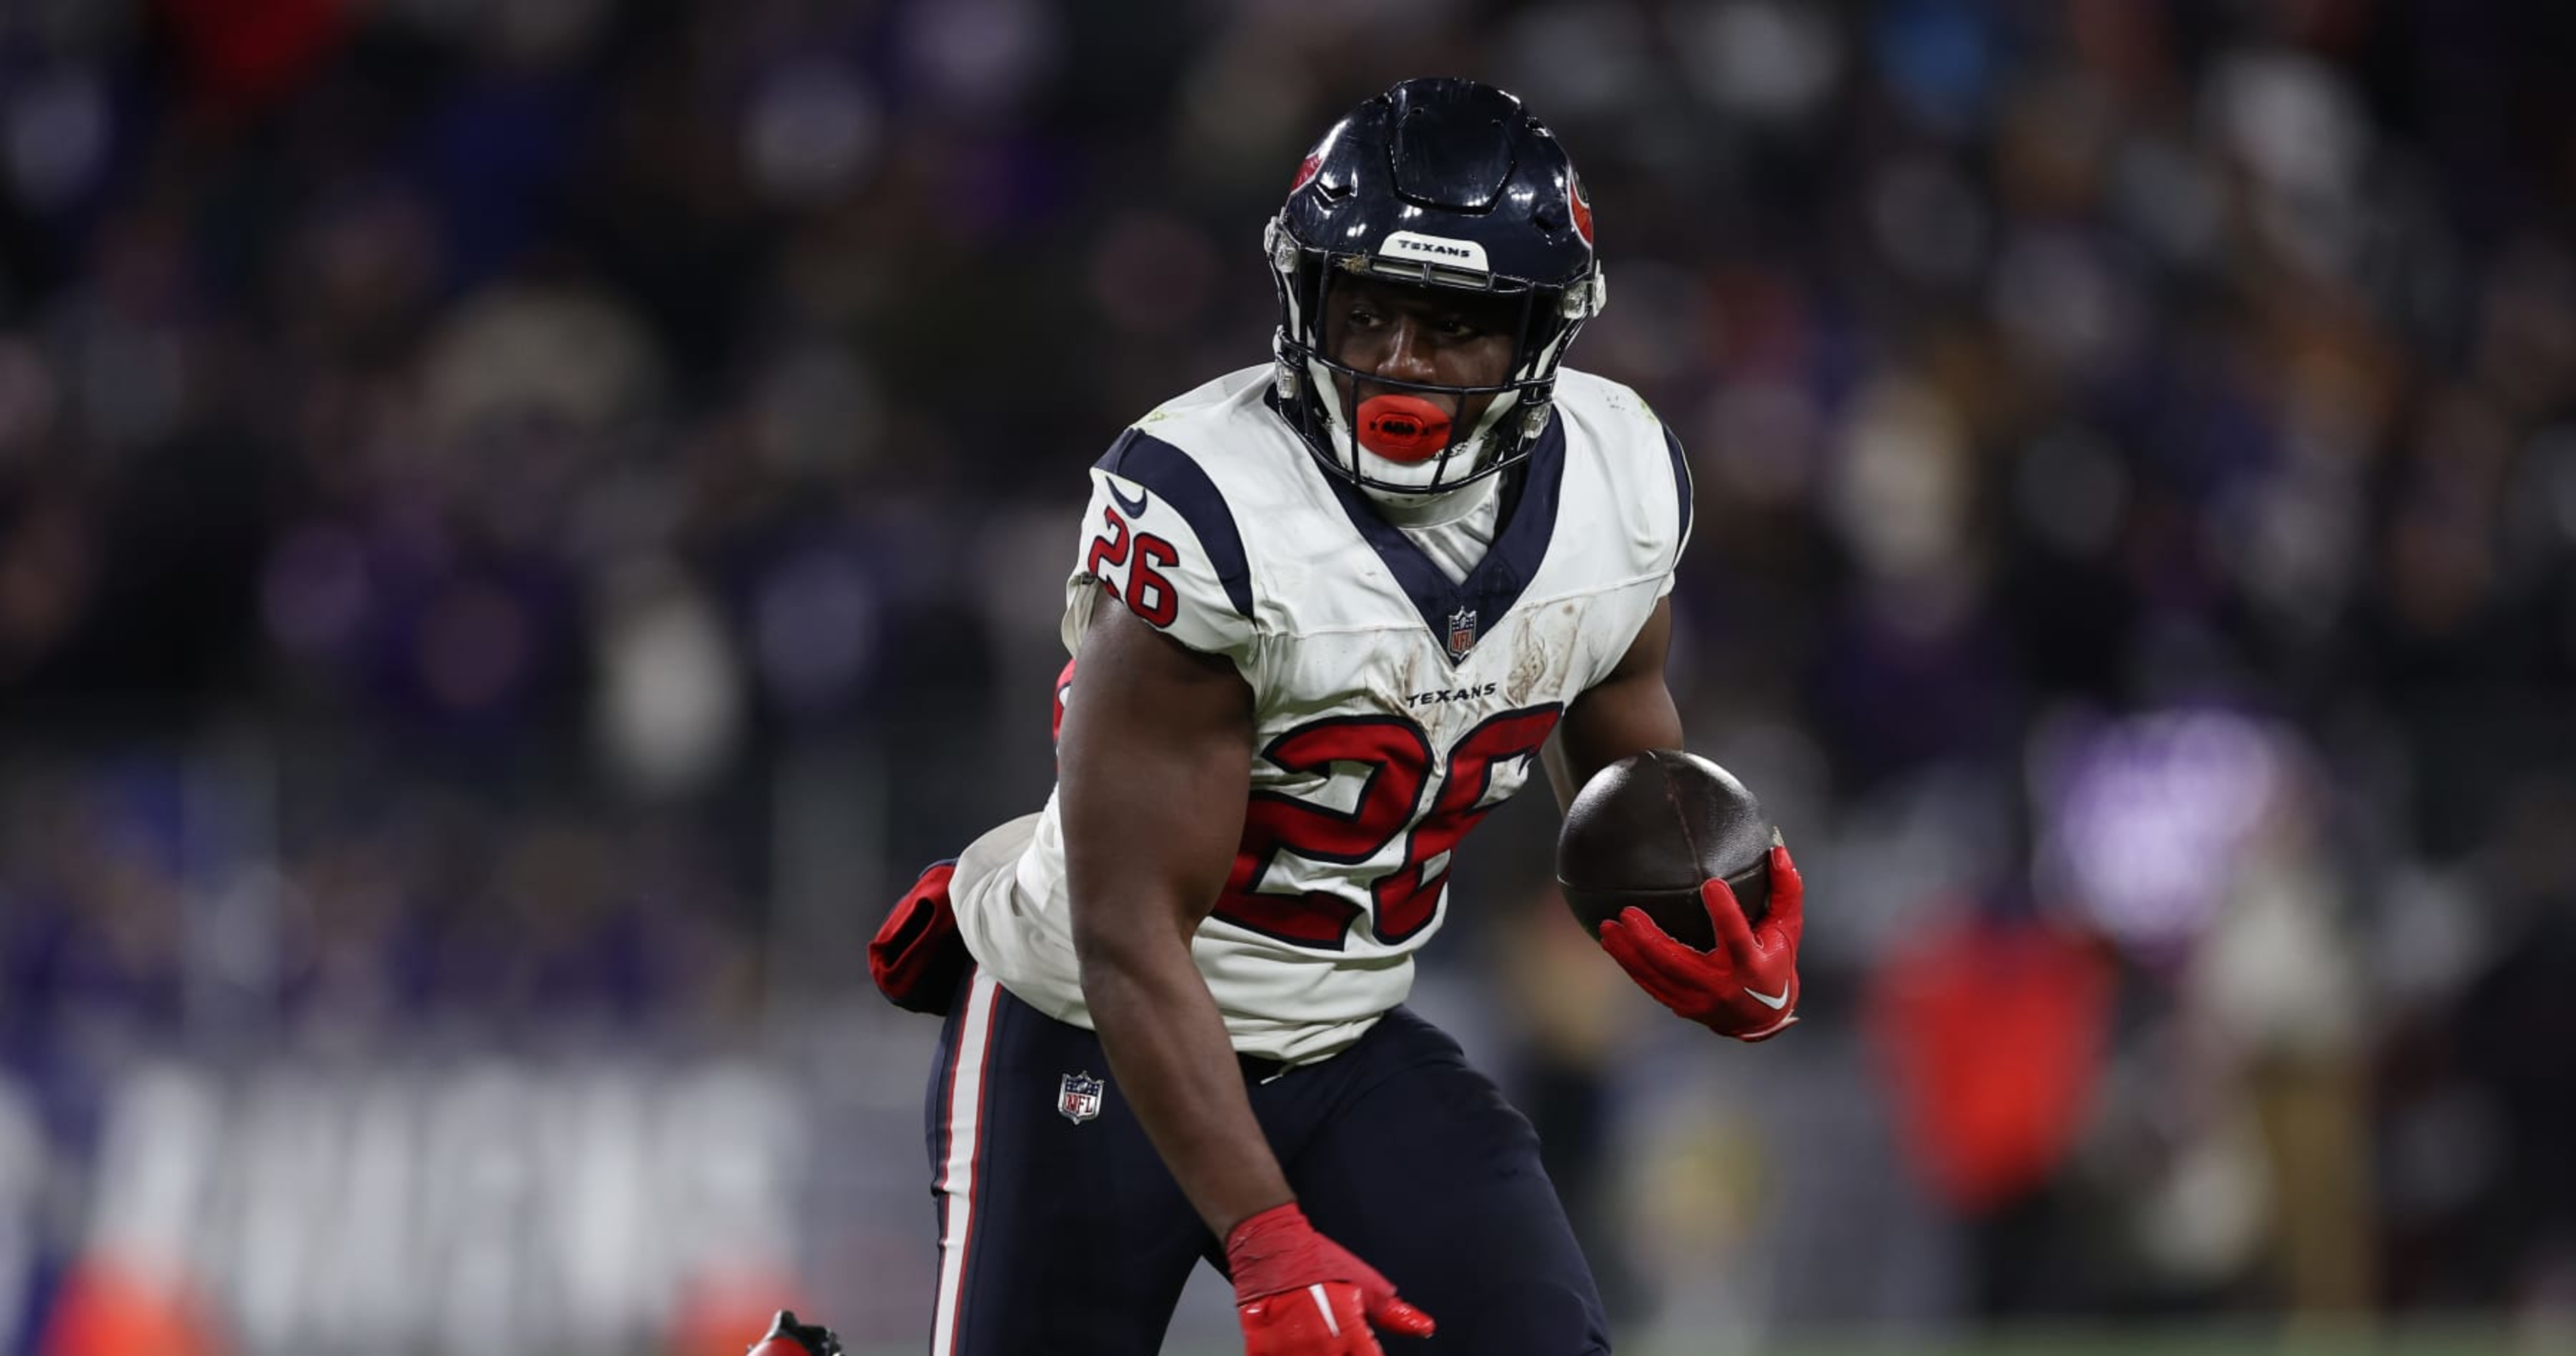 Giants' Devin Singletary to Wear Saquon Barkley's No. 26 Jersey After $16.5M Contract